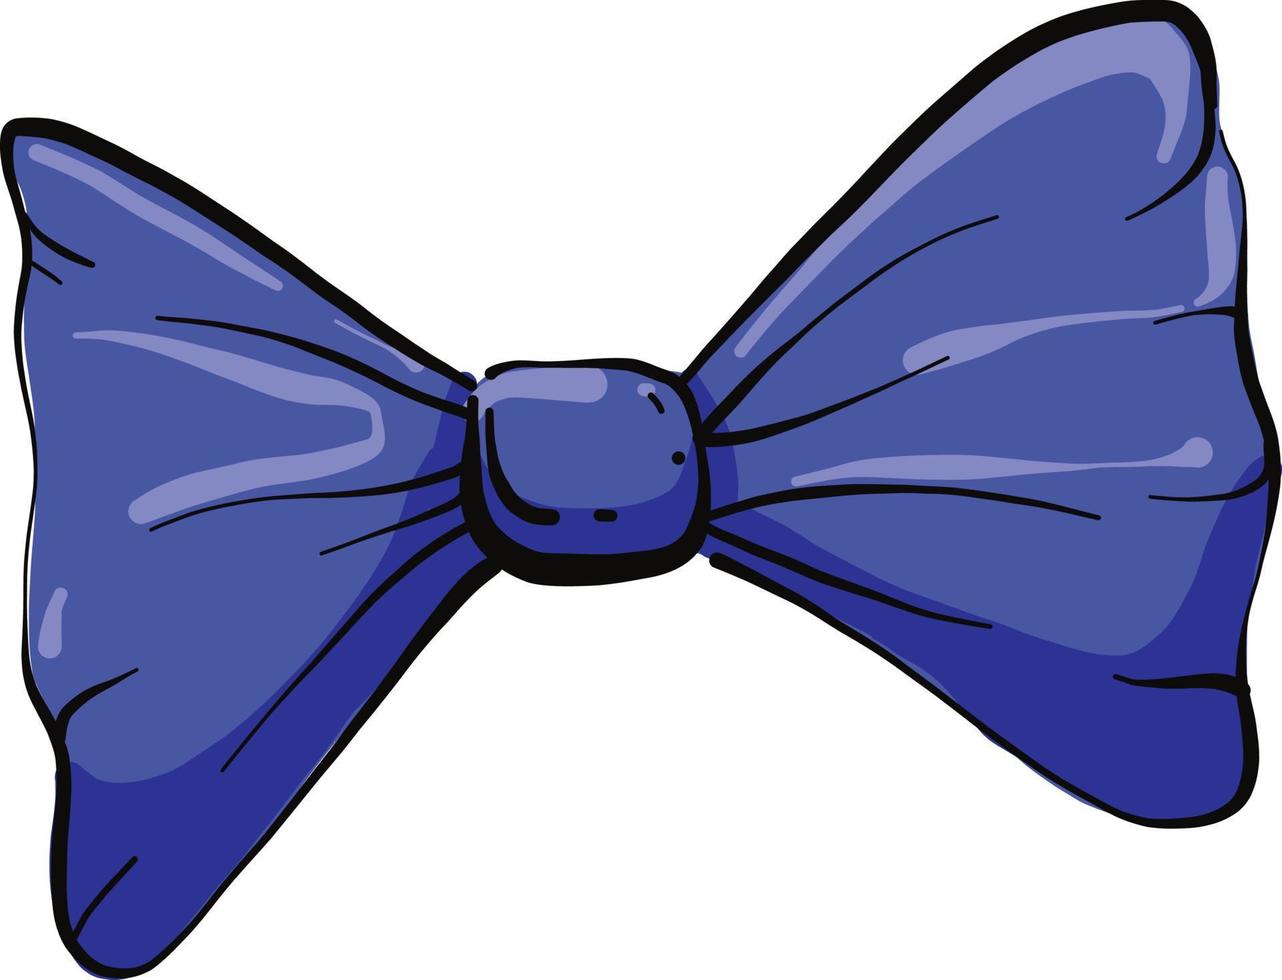 Blue bow, illustration, vector on a white background.